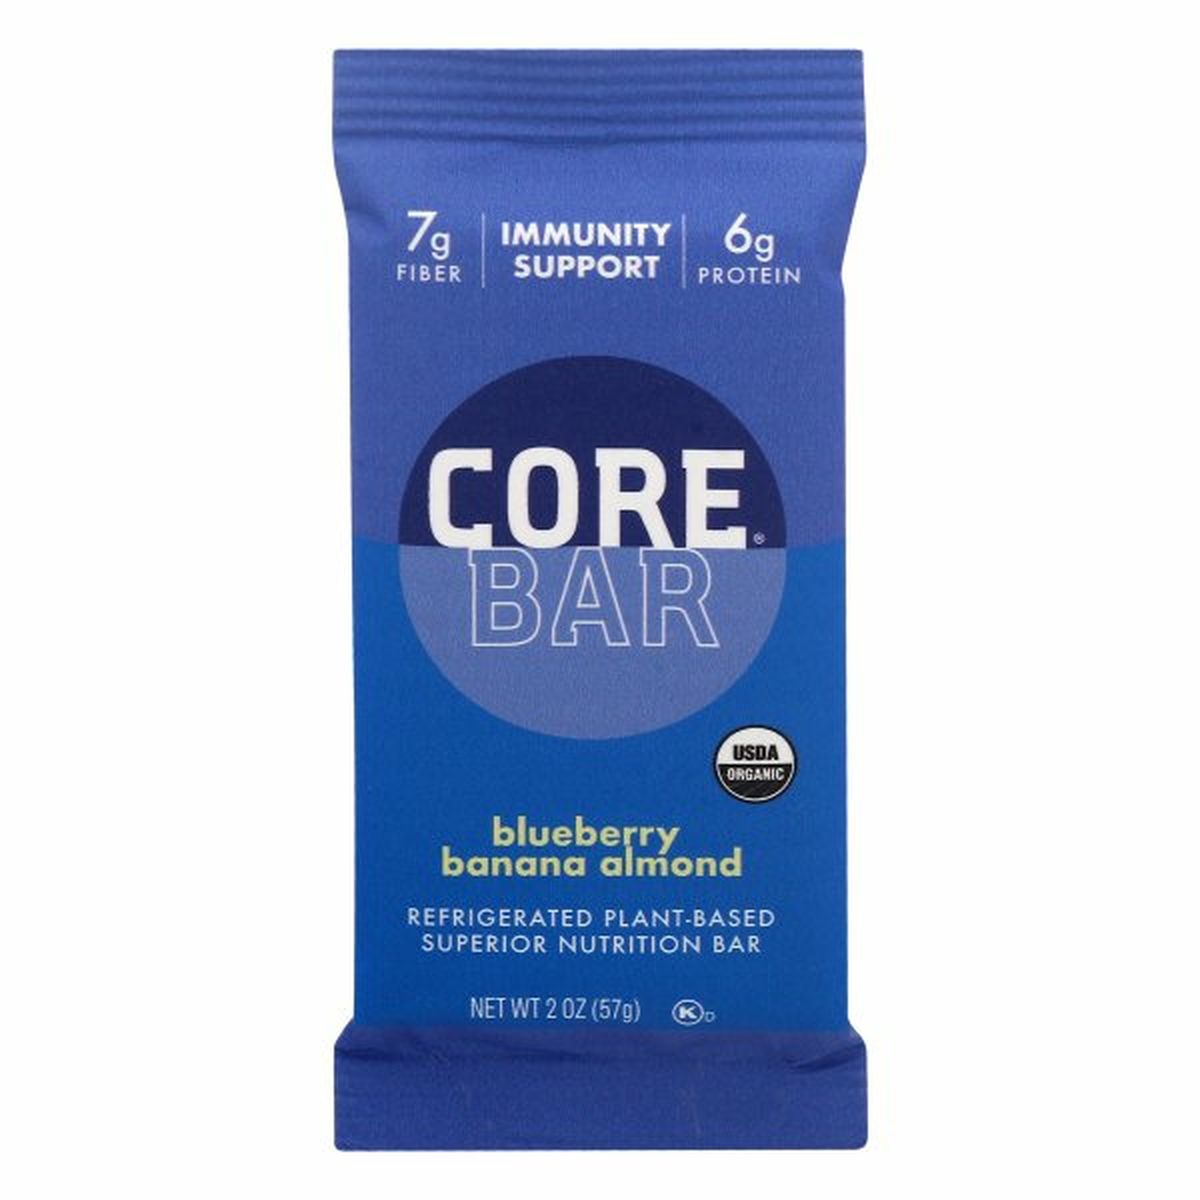 Calories in Core Meal Bar, Organic, Blueberry Banana Almond